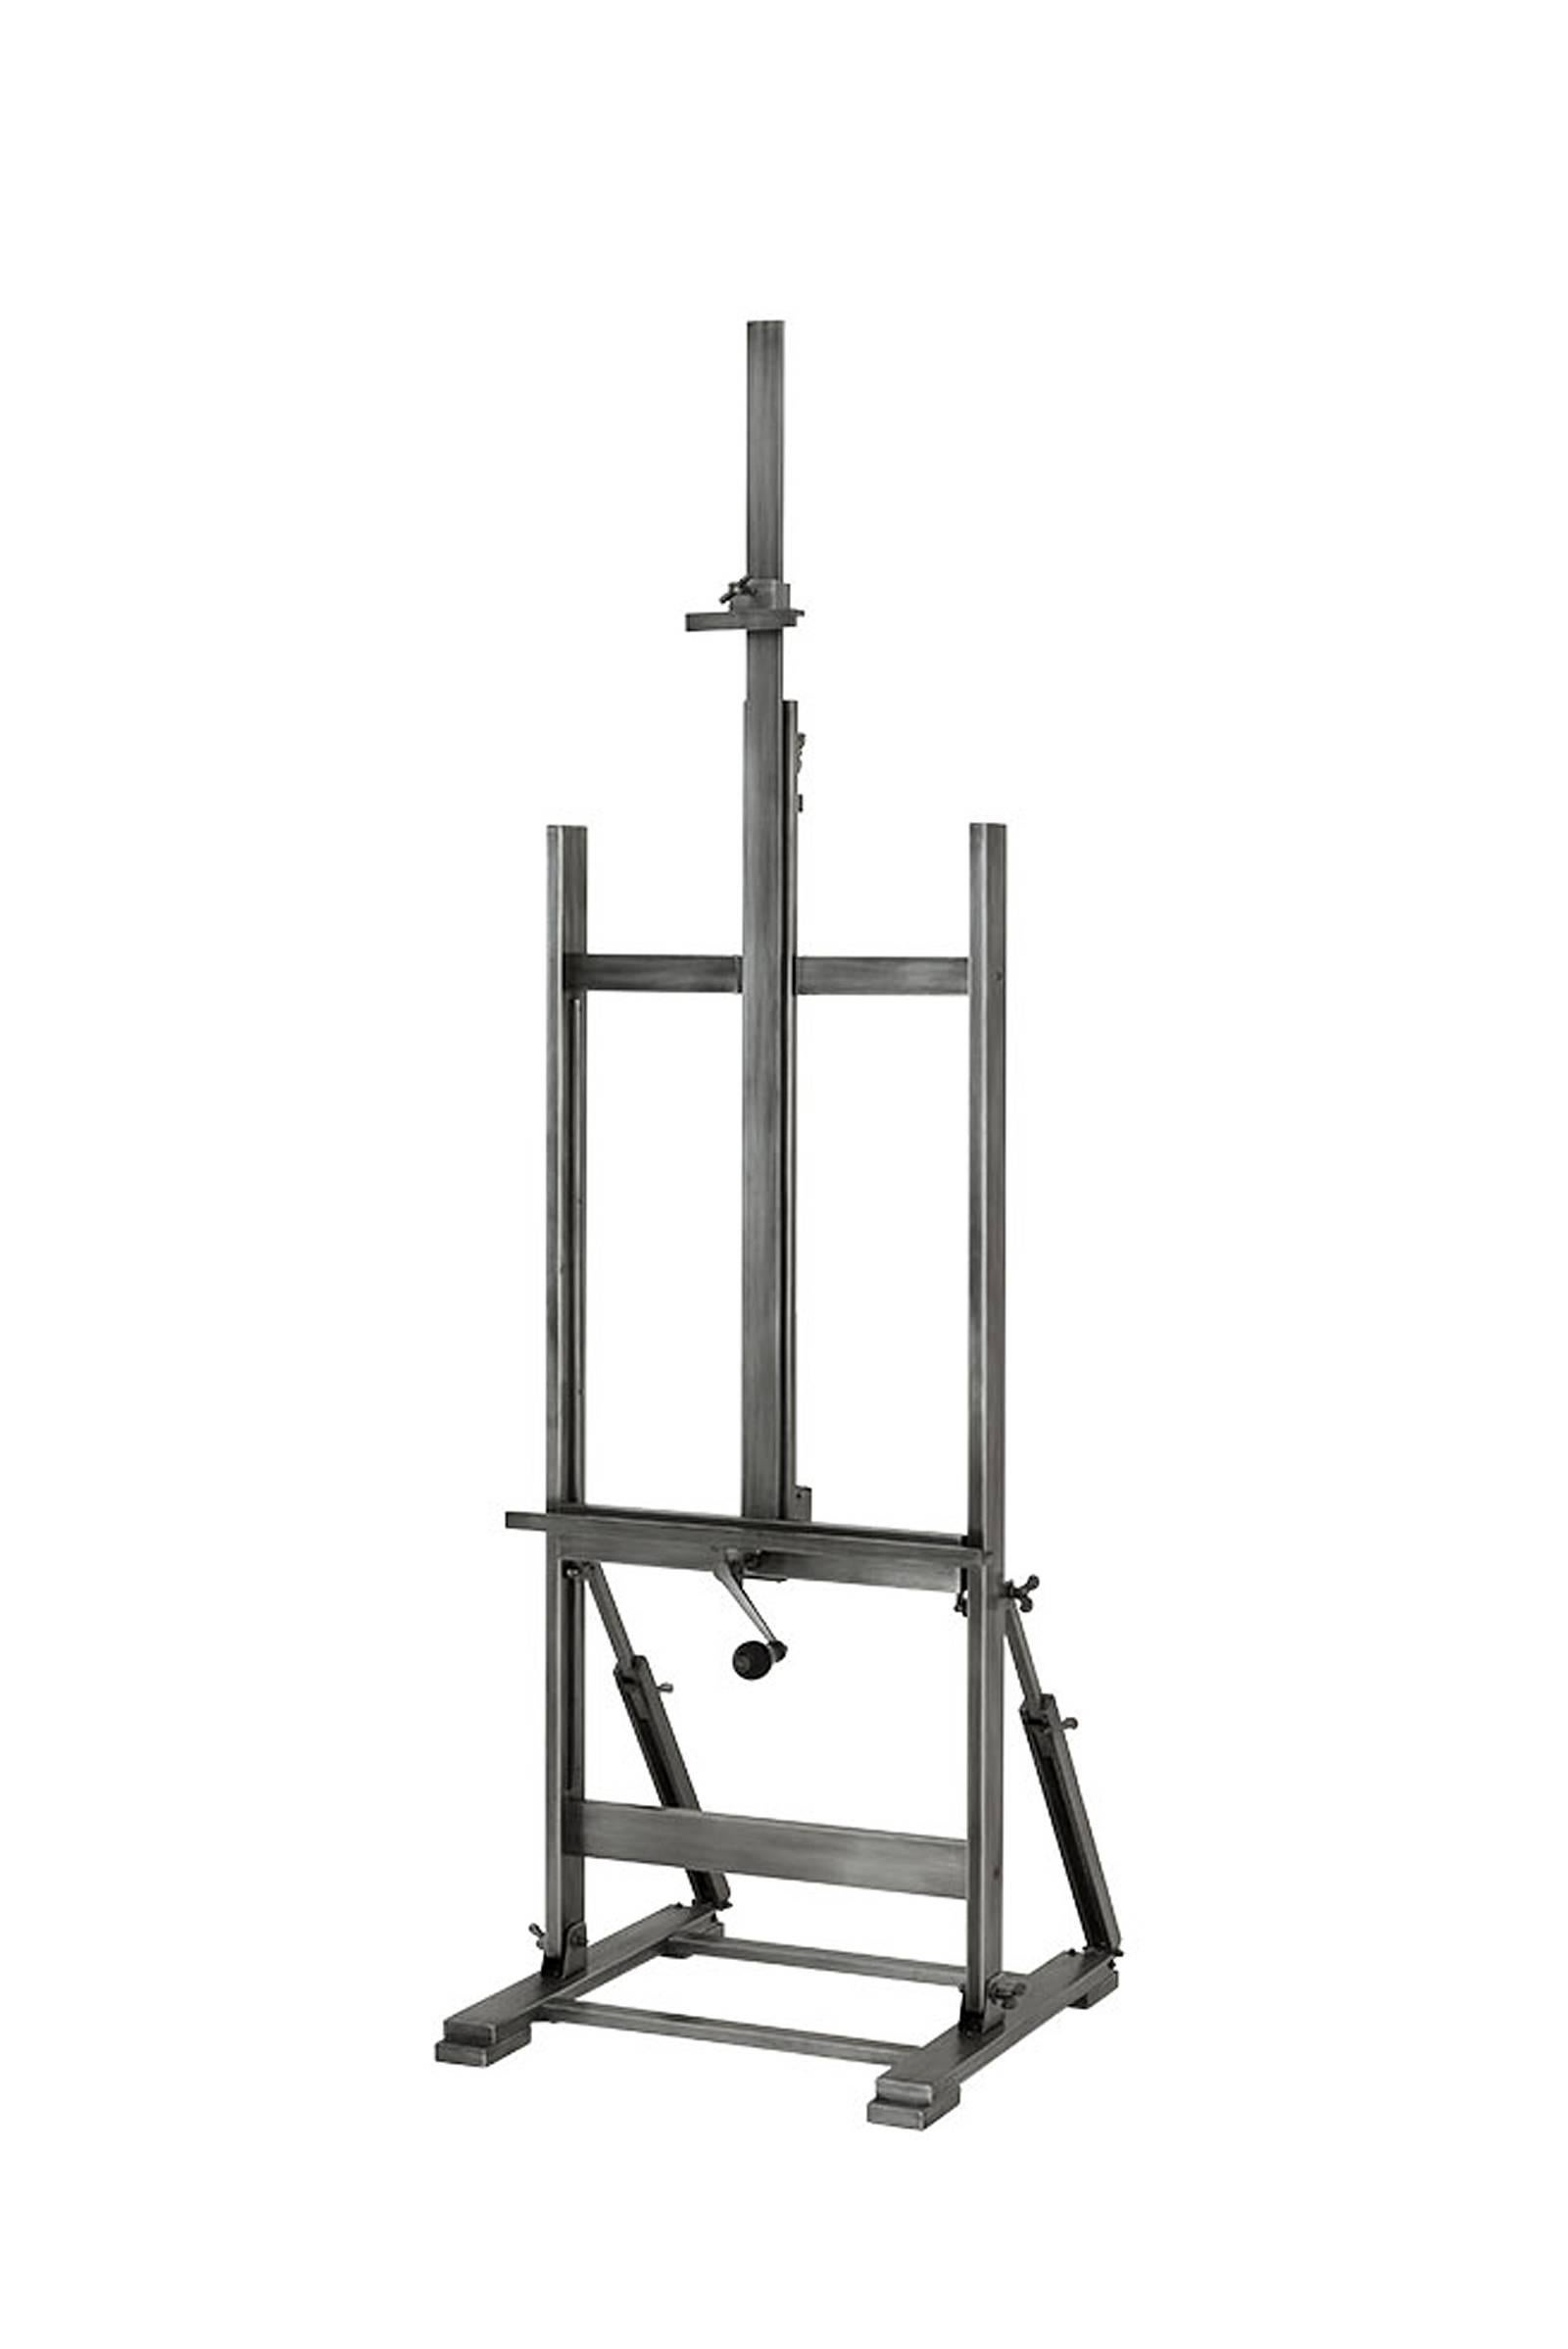 Easel artistic in gunmetal finish.
Also available in nickel finish.
Measures: L 79 x D 67.5 x H 195/340 cm.
